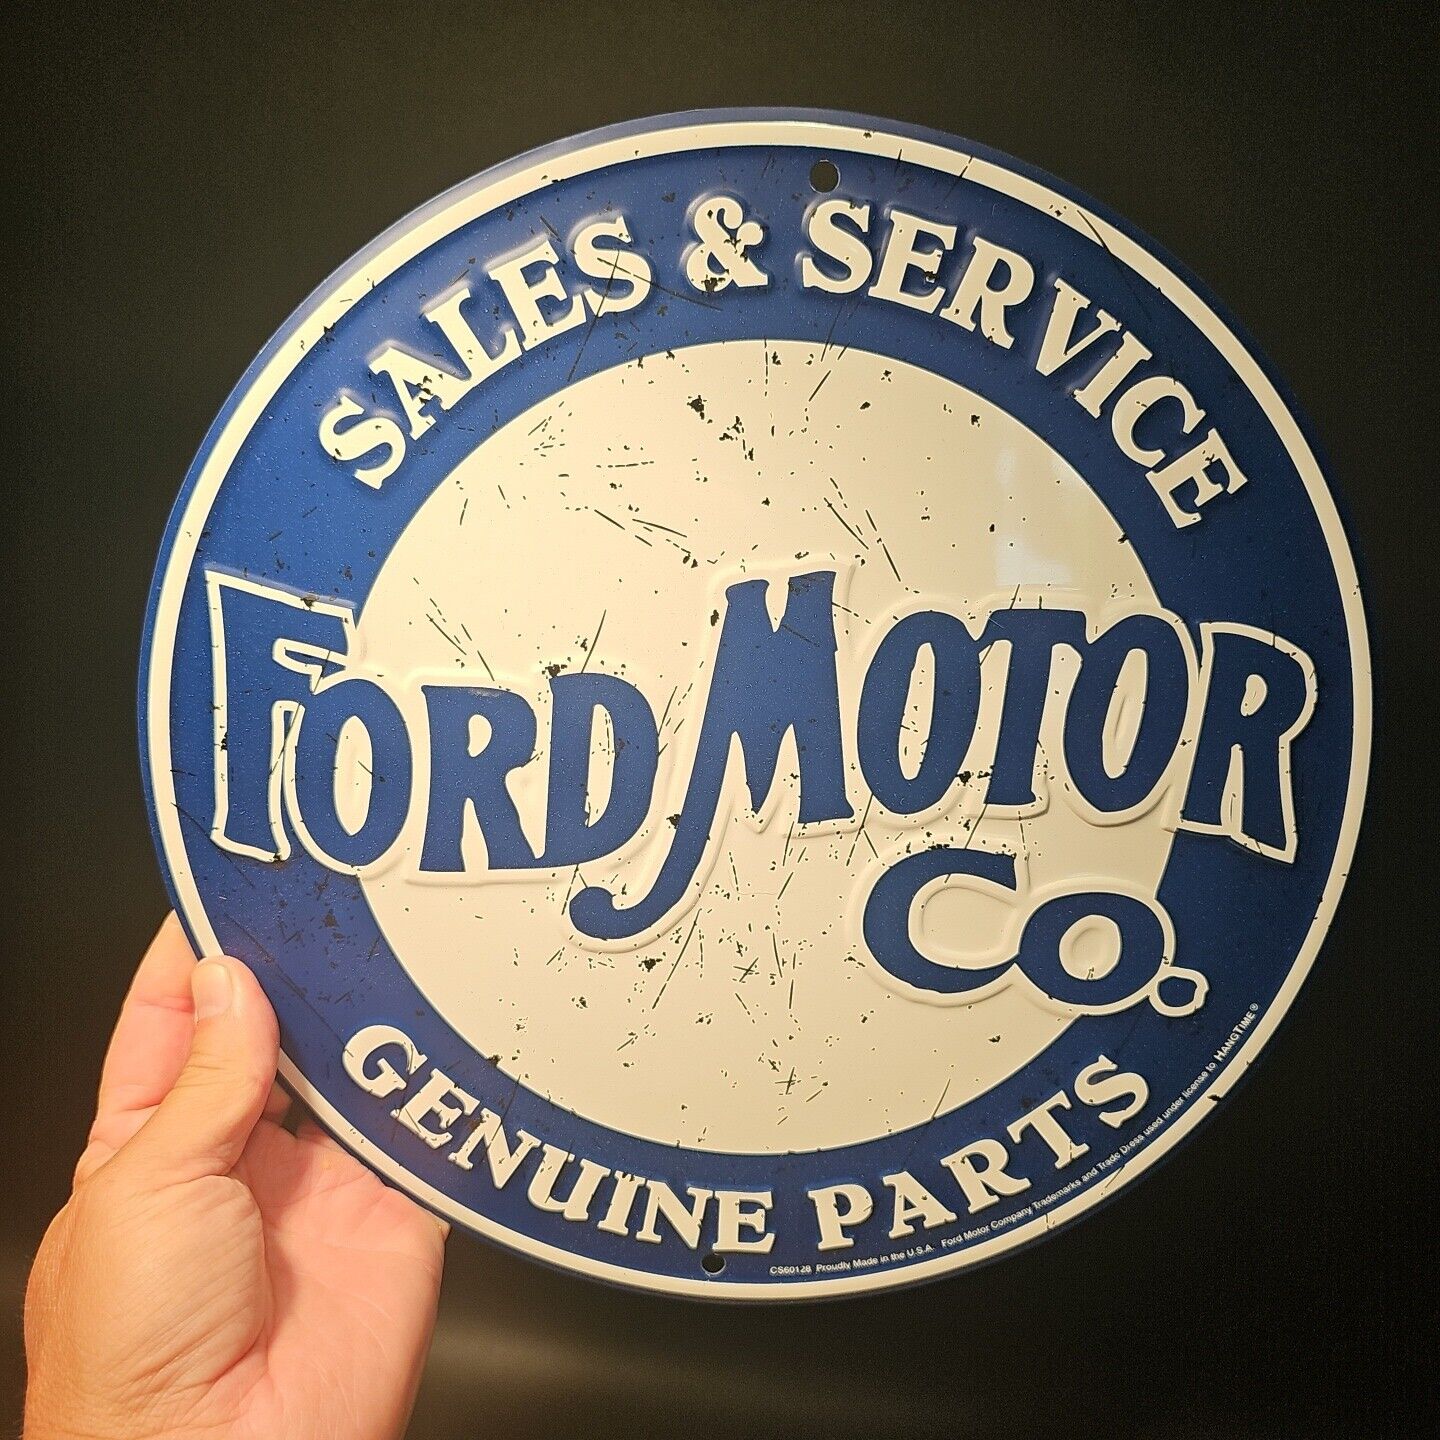 12" Antique Vintage Style Round Metal Ford Sign Plaque